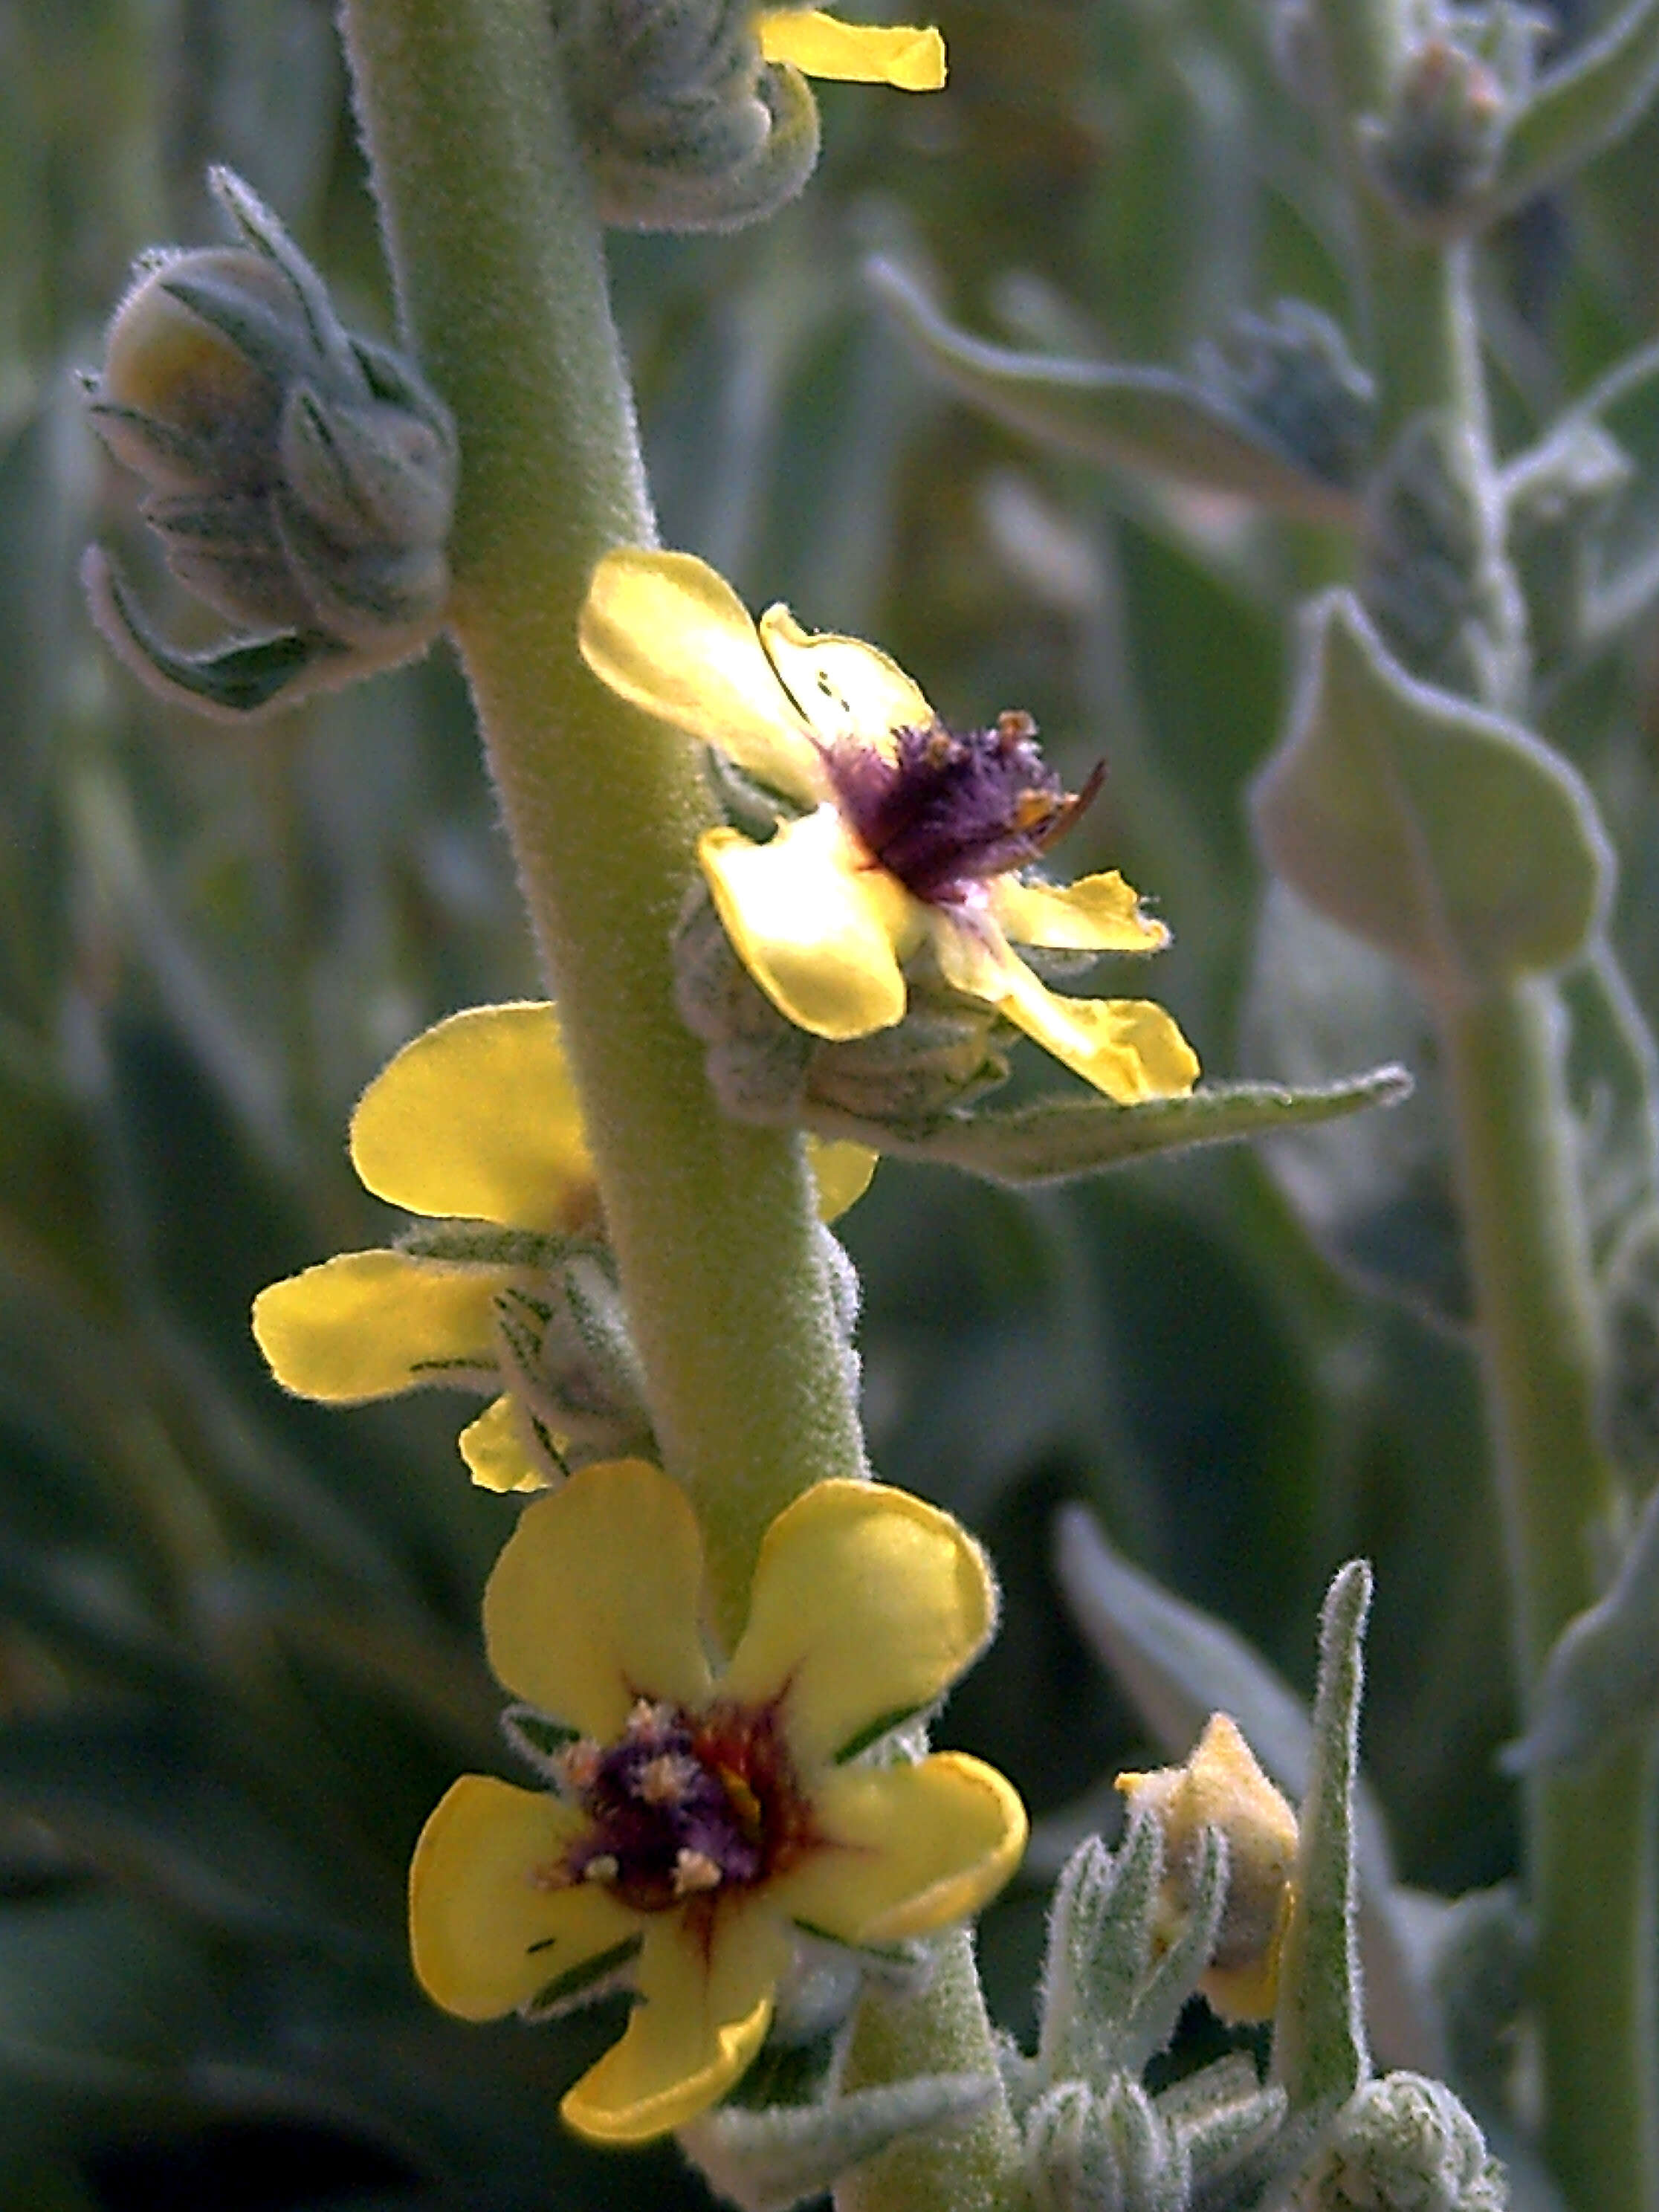 Image of wand mullein